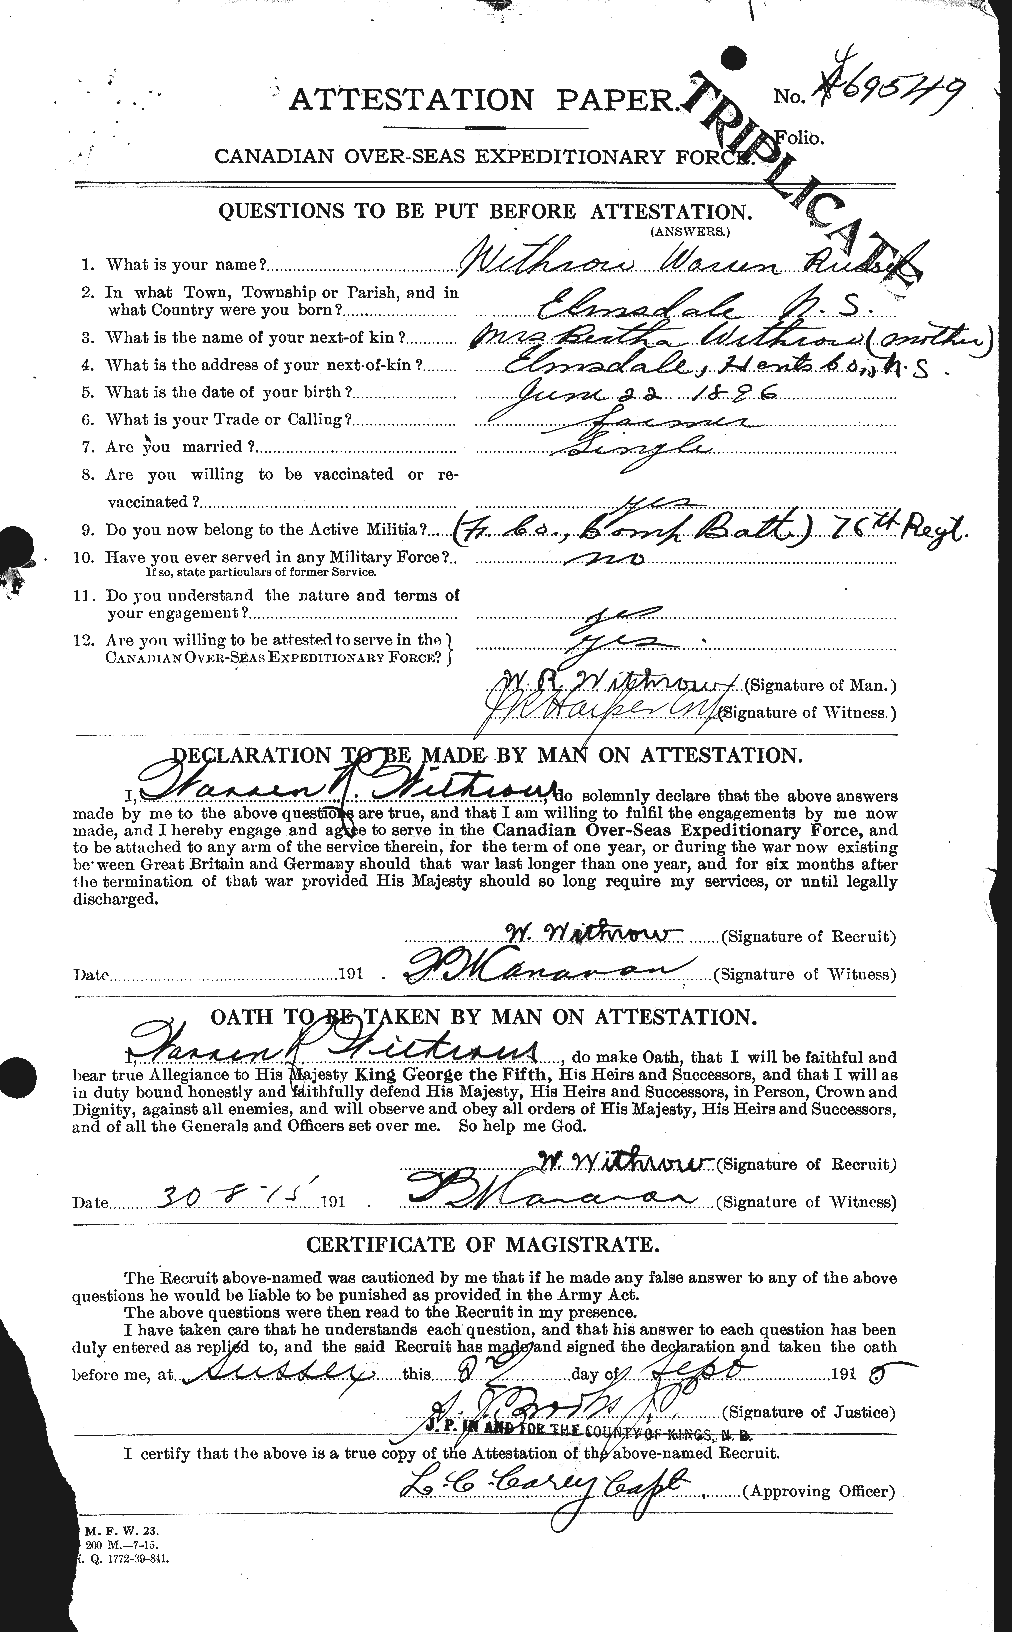 Personnel Records of the First World War - CEF 680030a